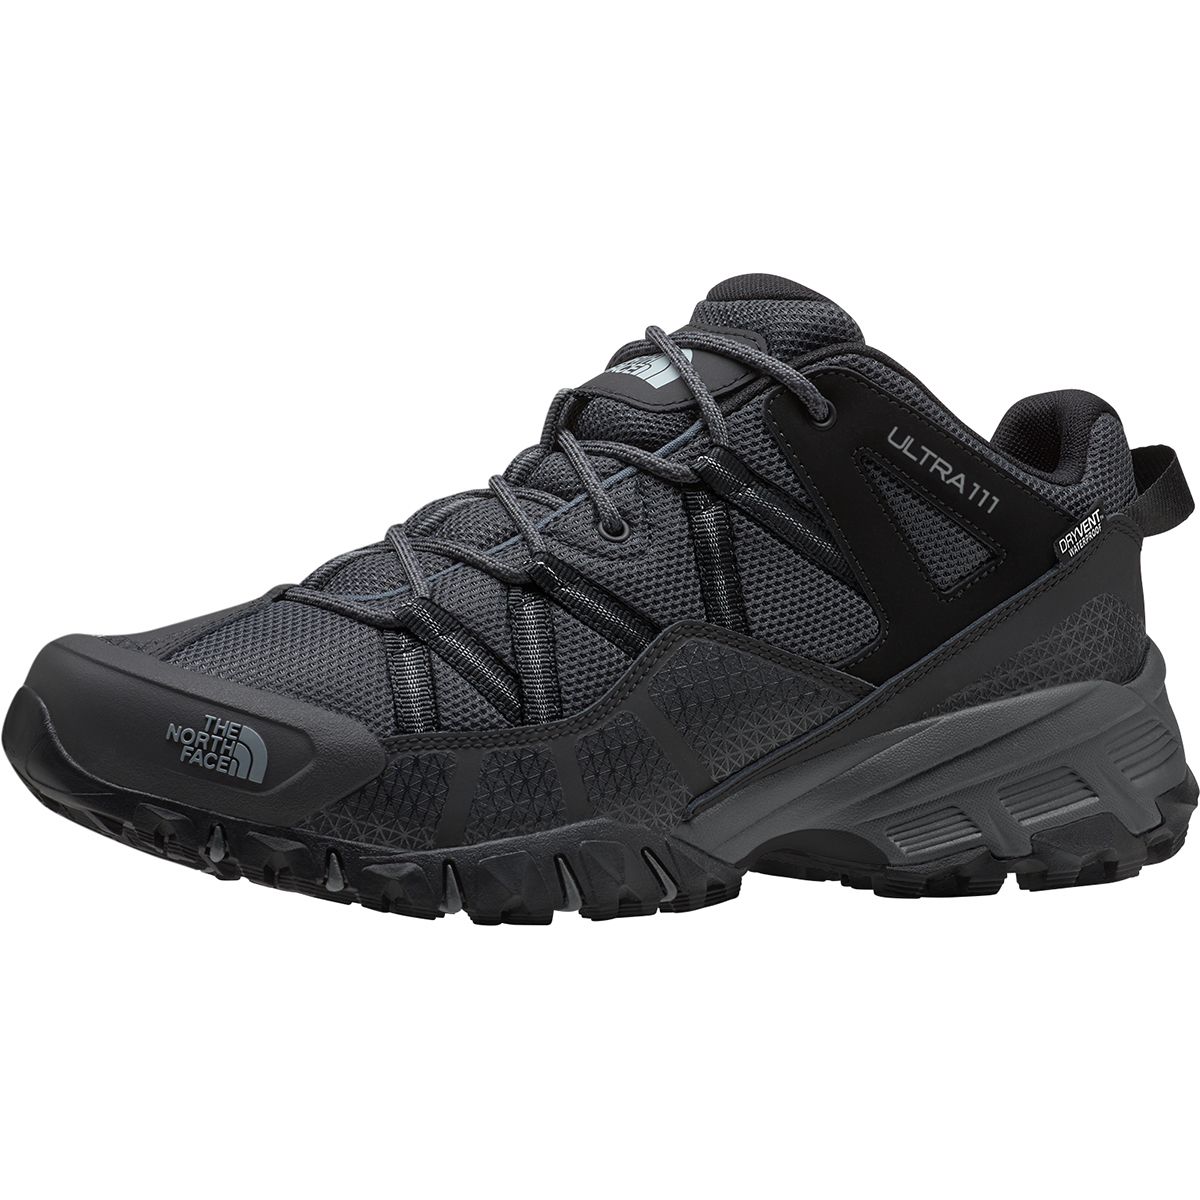 The North Face Ultra 111 Waterproof 